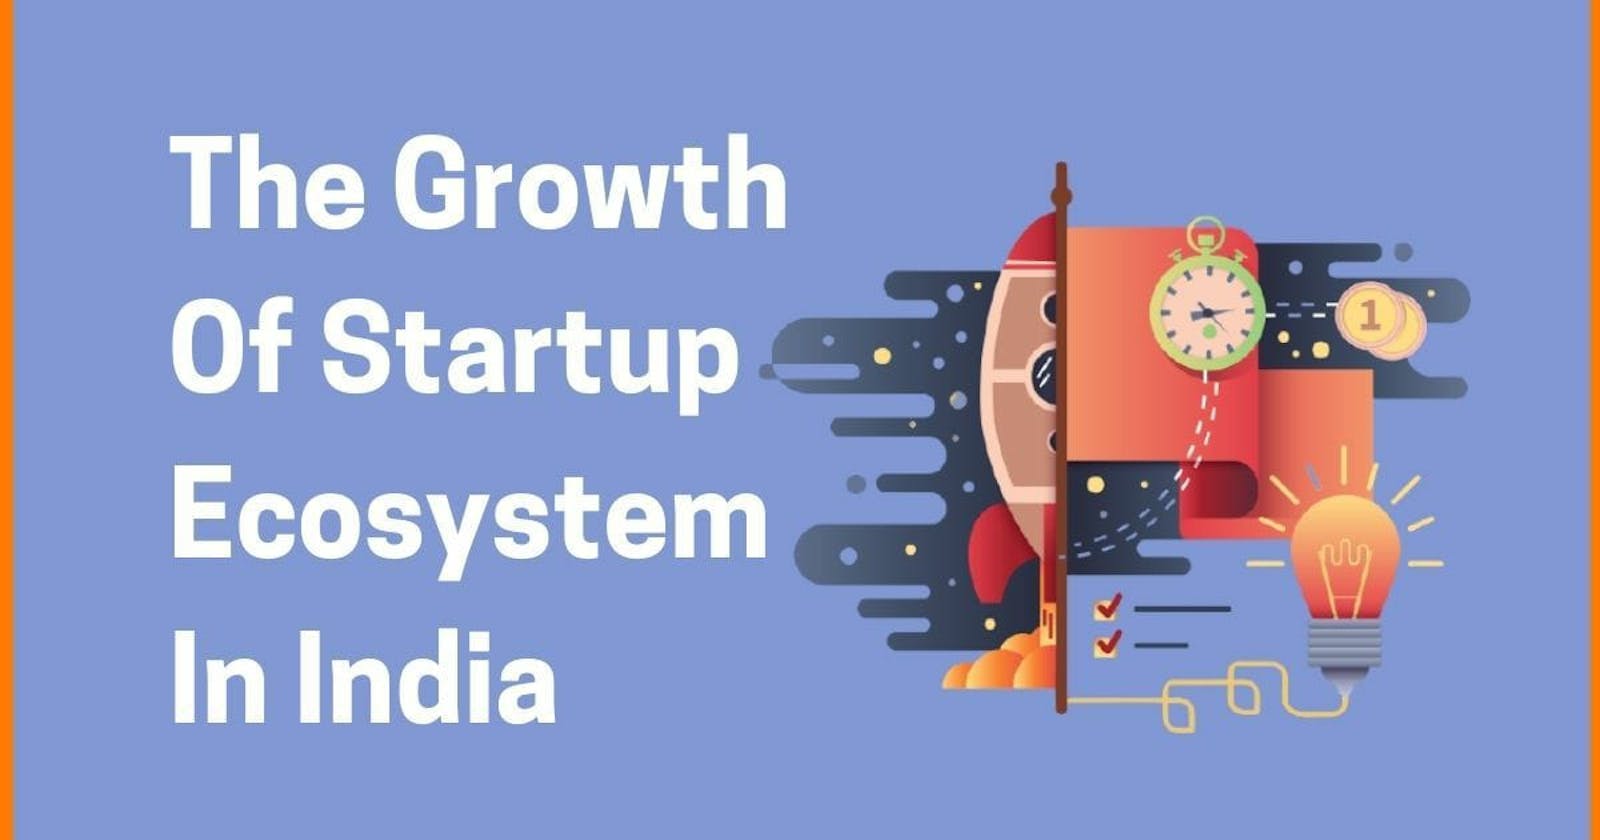 How India is emerging as a hub of startups